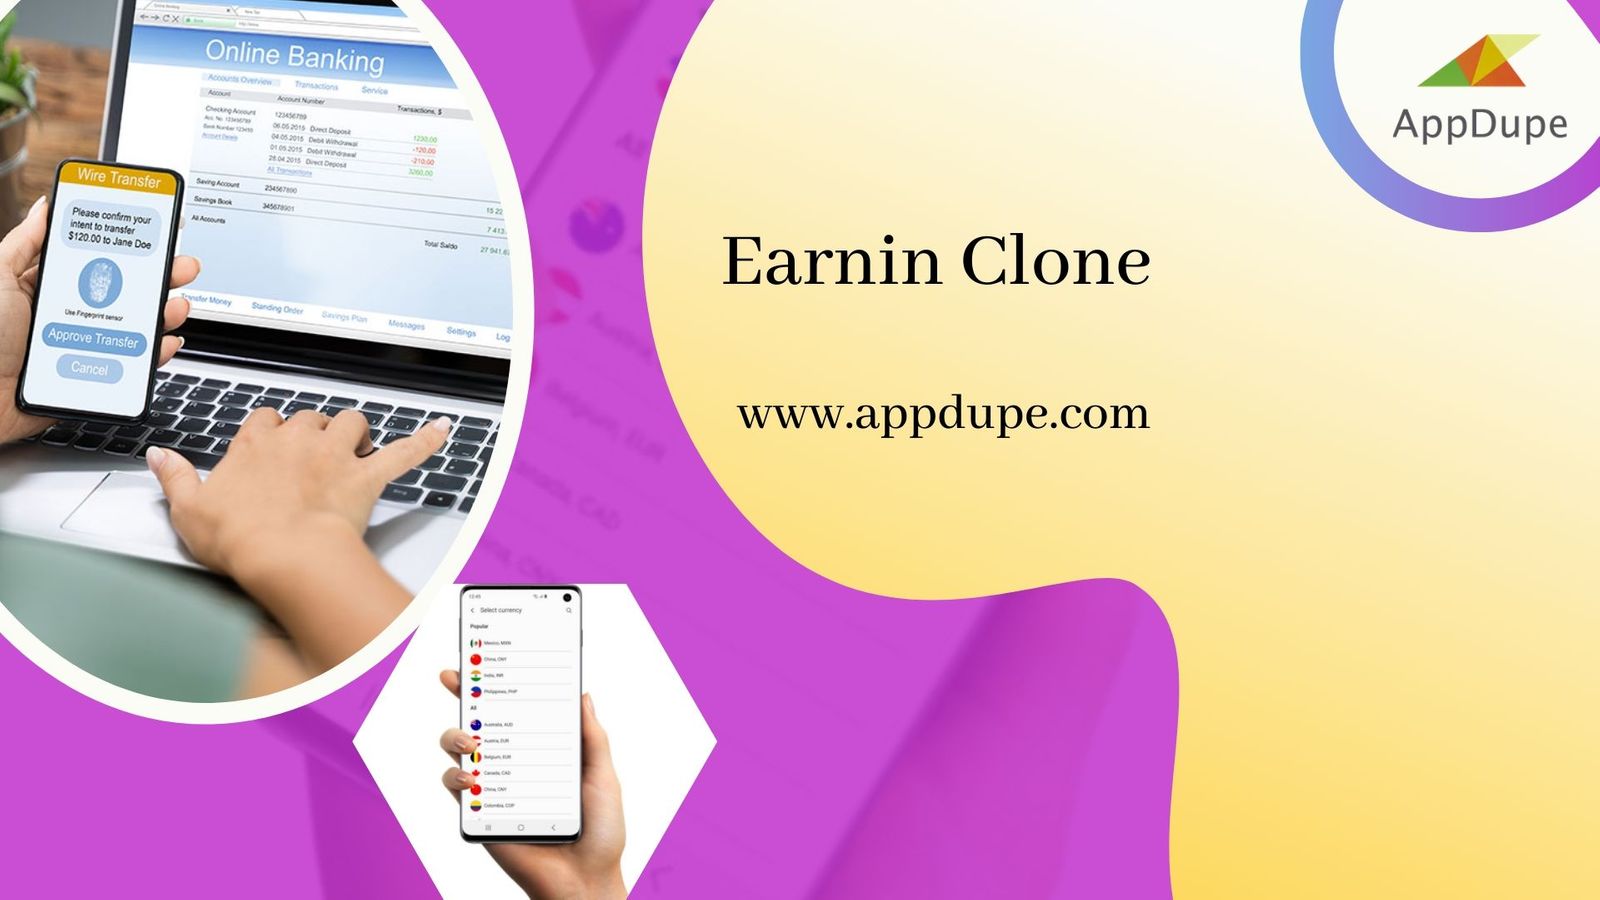 List of benefits provided by an app like Earnin for their customers  